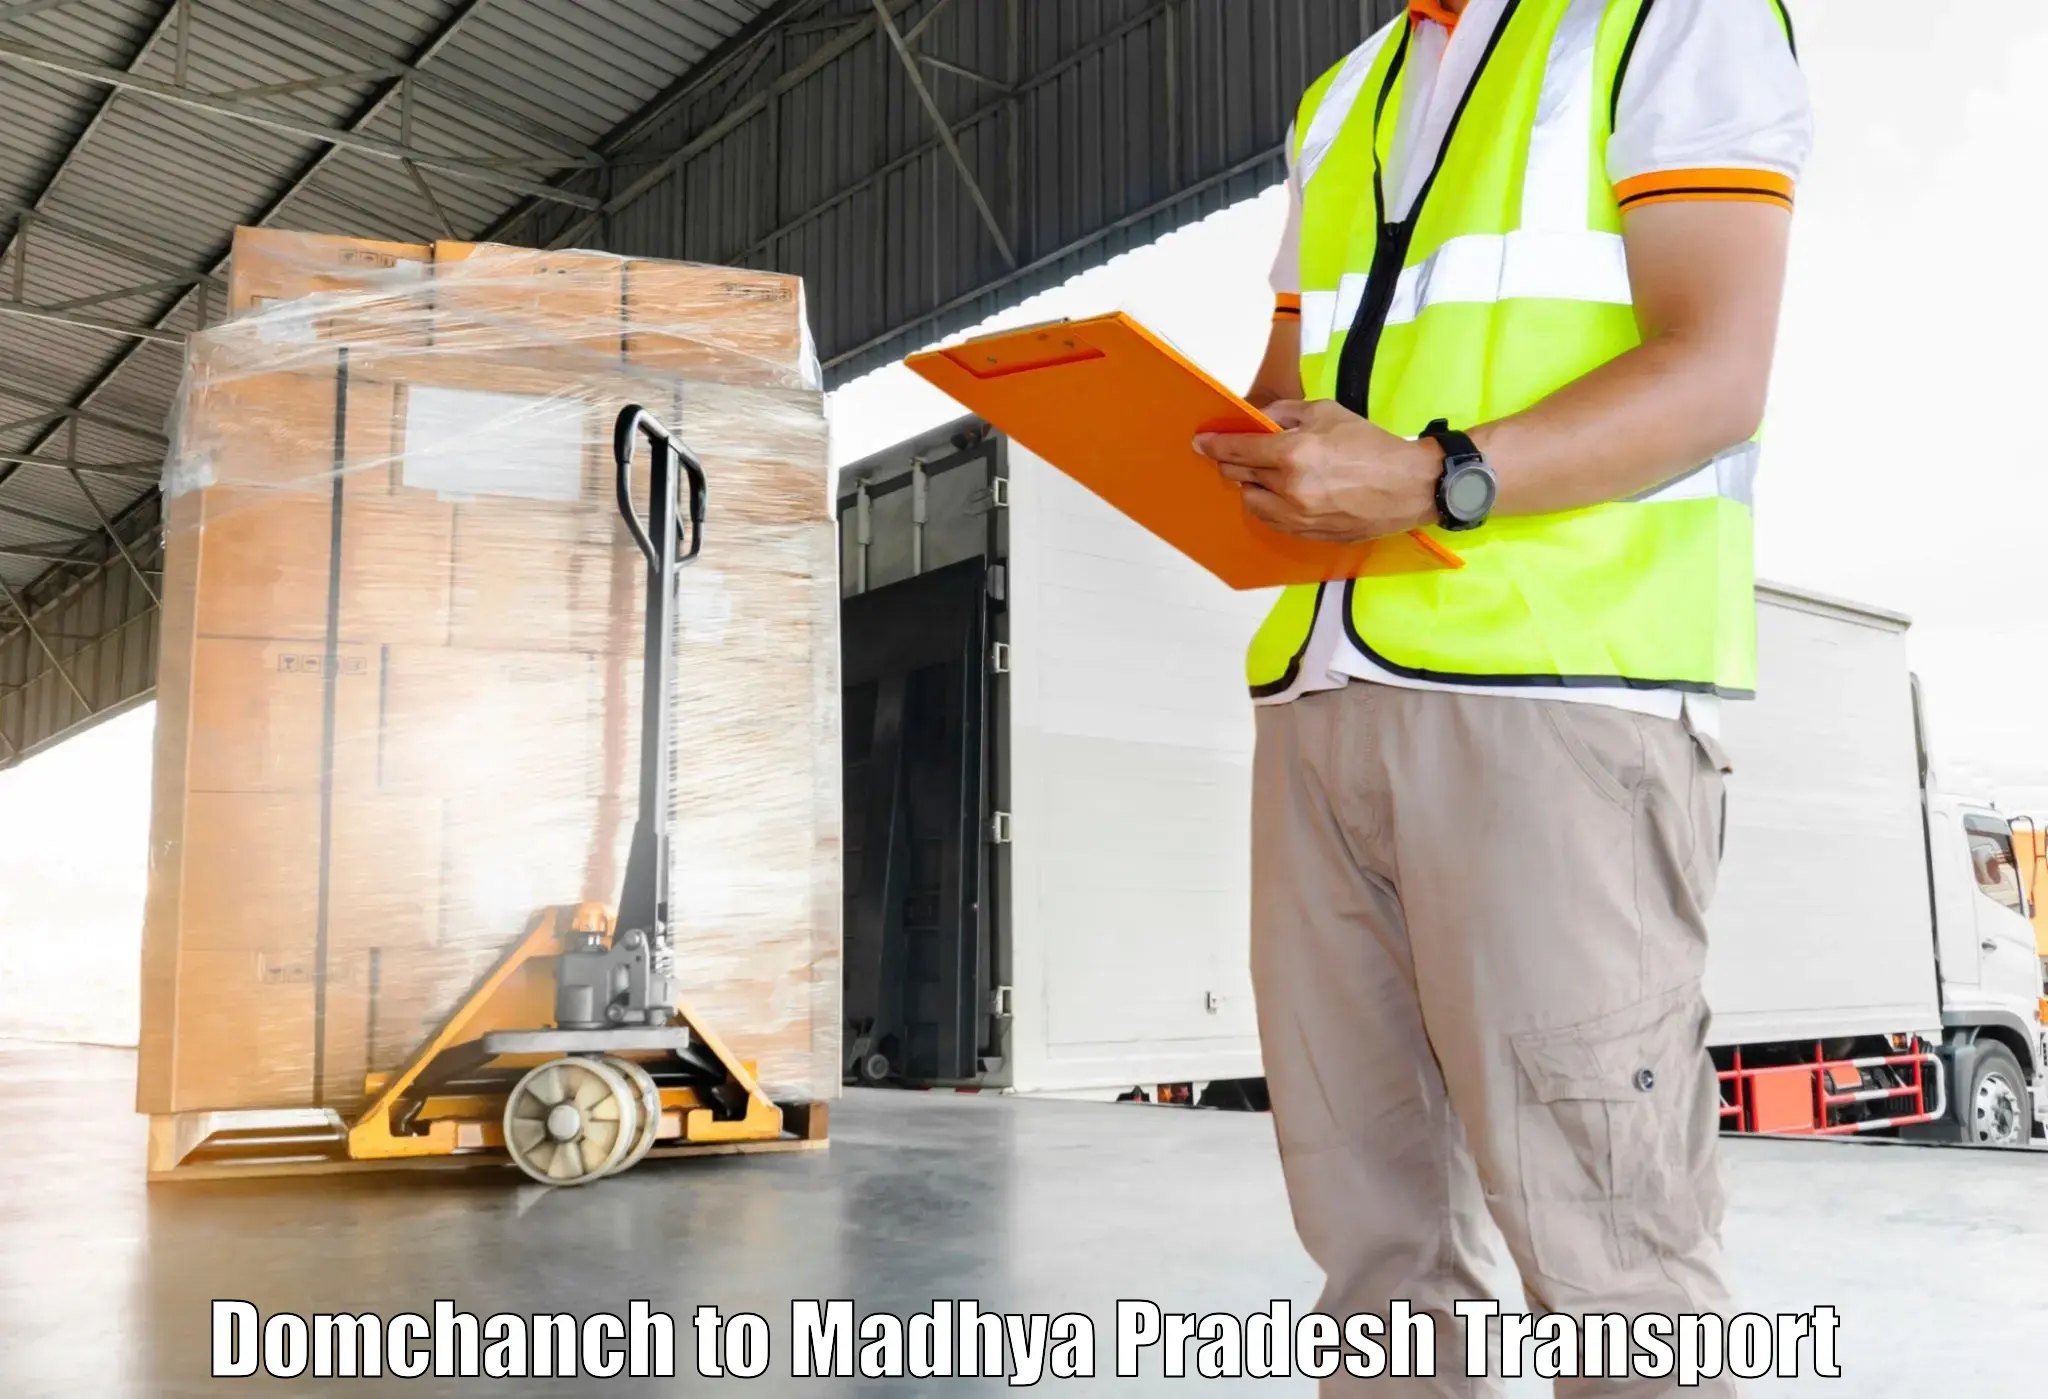 Lorry transport service Domchanch to Gwalior